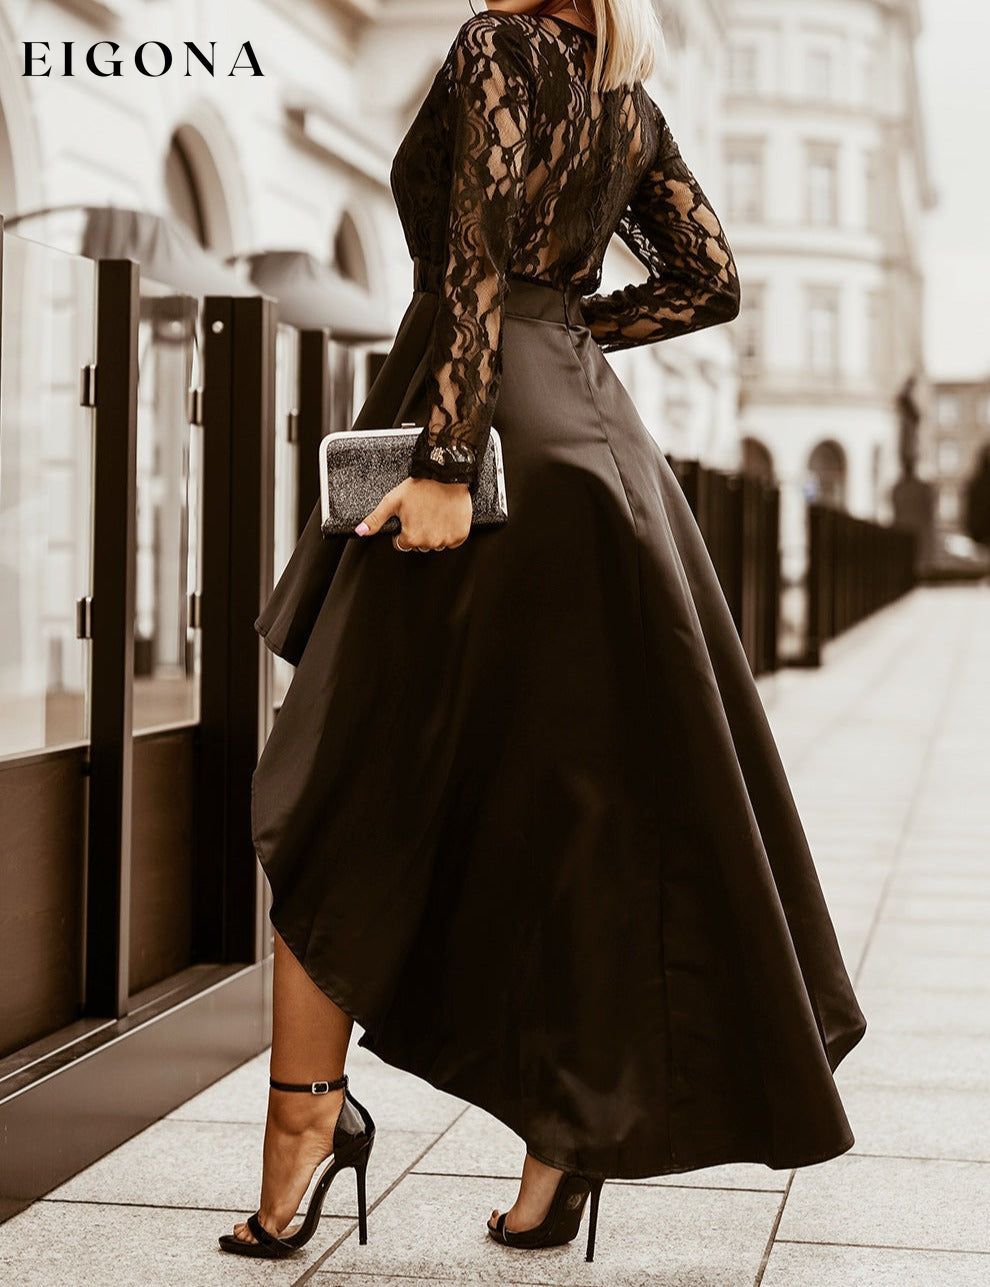 Black Long Sleeve Lace High Low Long Sleeve Satin Evening Dress clothes DL Exclusive dress dresses evening dress evening dresses Evening Dresses Wholesale Fabric Lace Fabric Satin formal dresses Lace maxi dress Occasion Wedding Prom Season Four Seasons Style Elegant